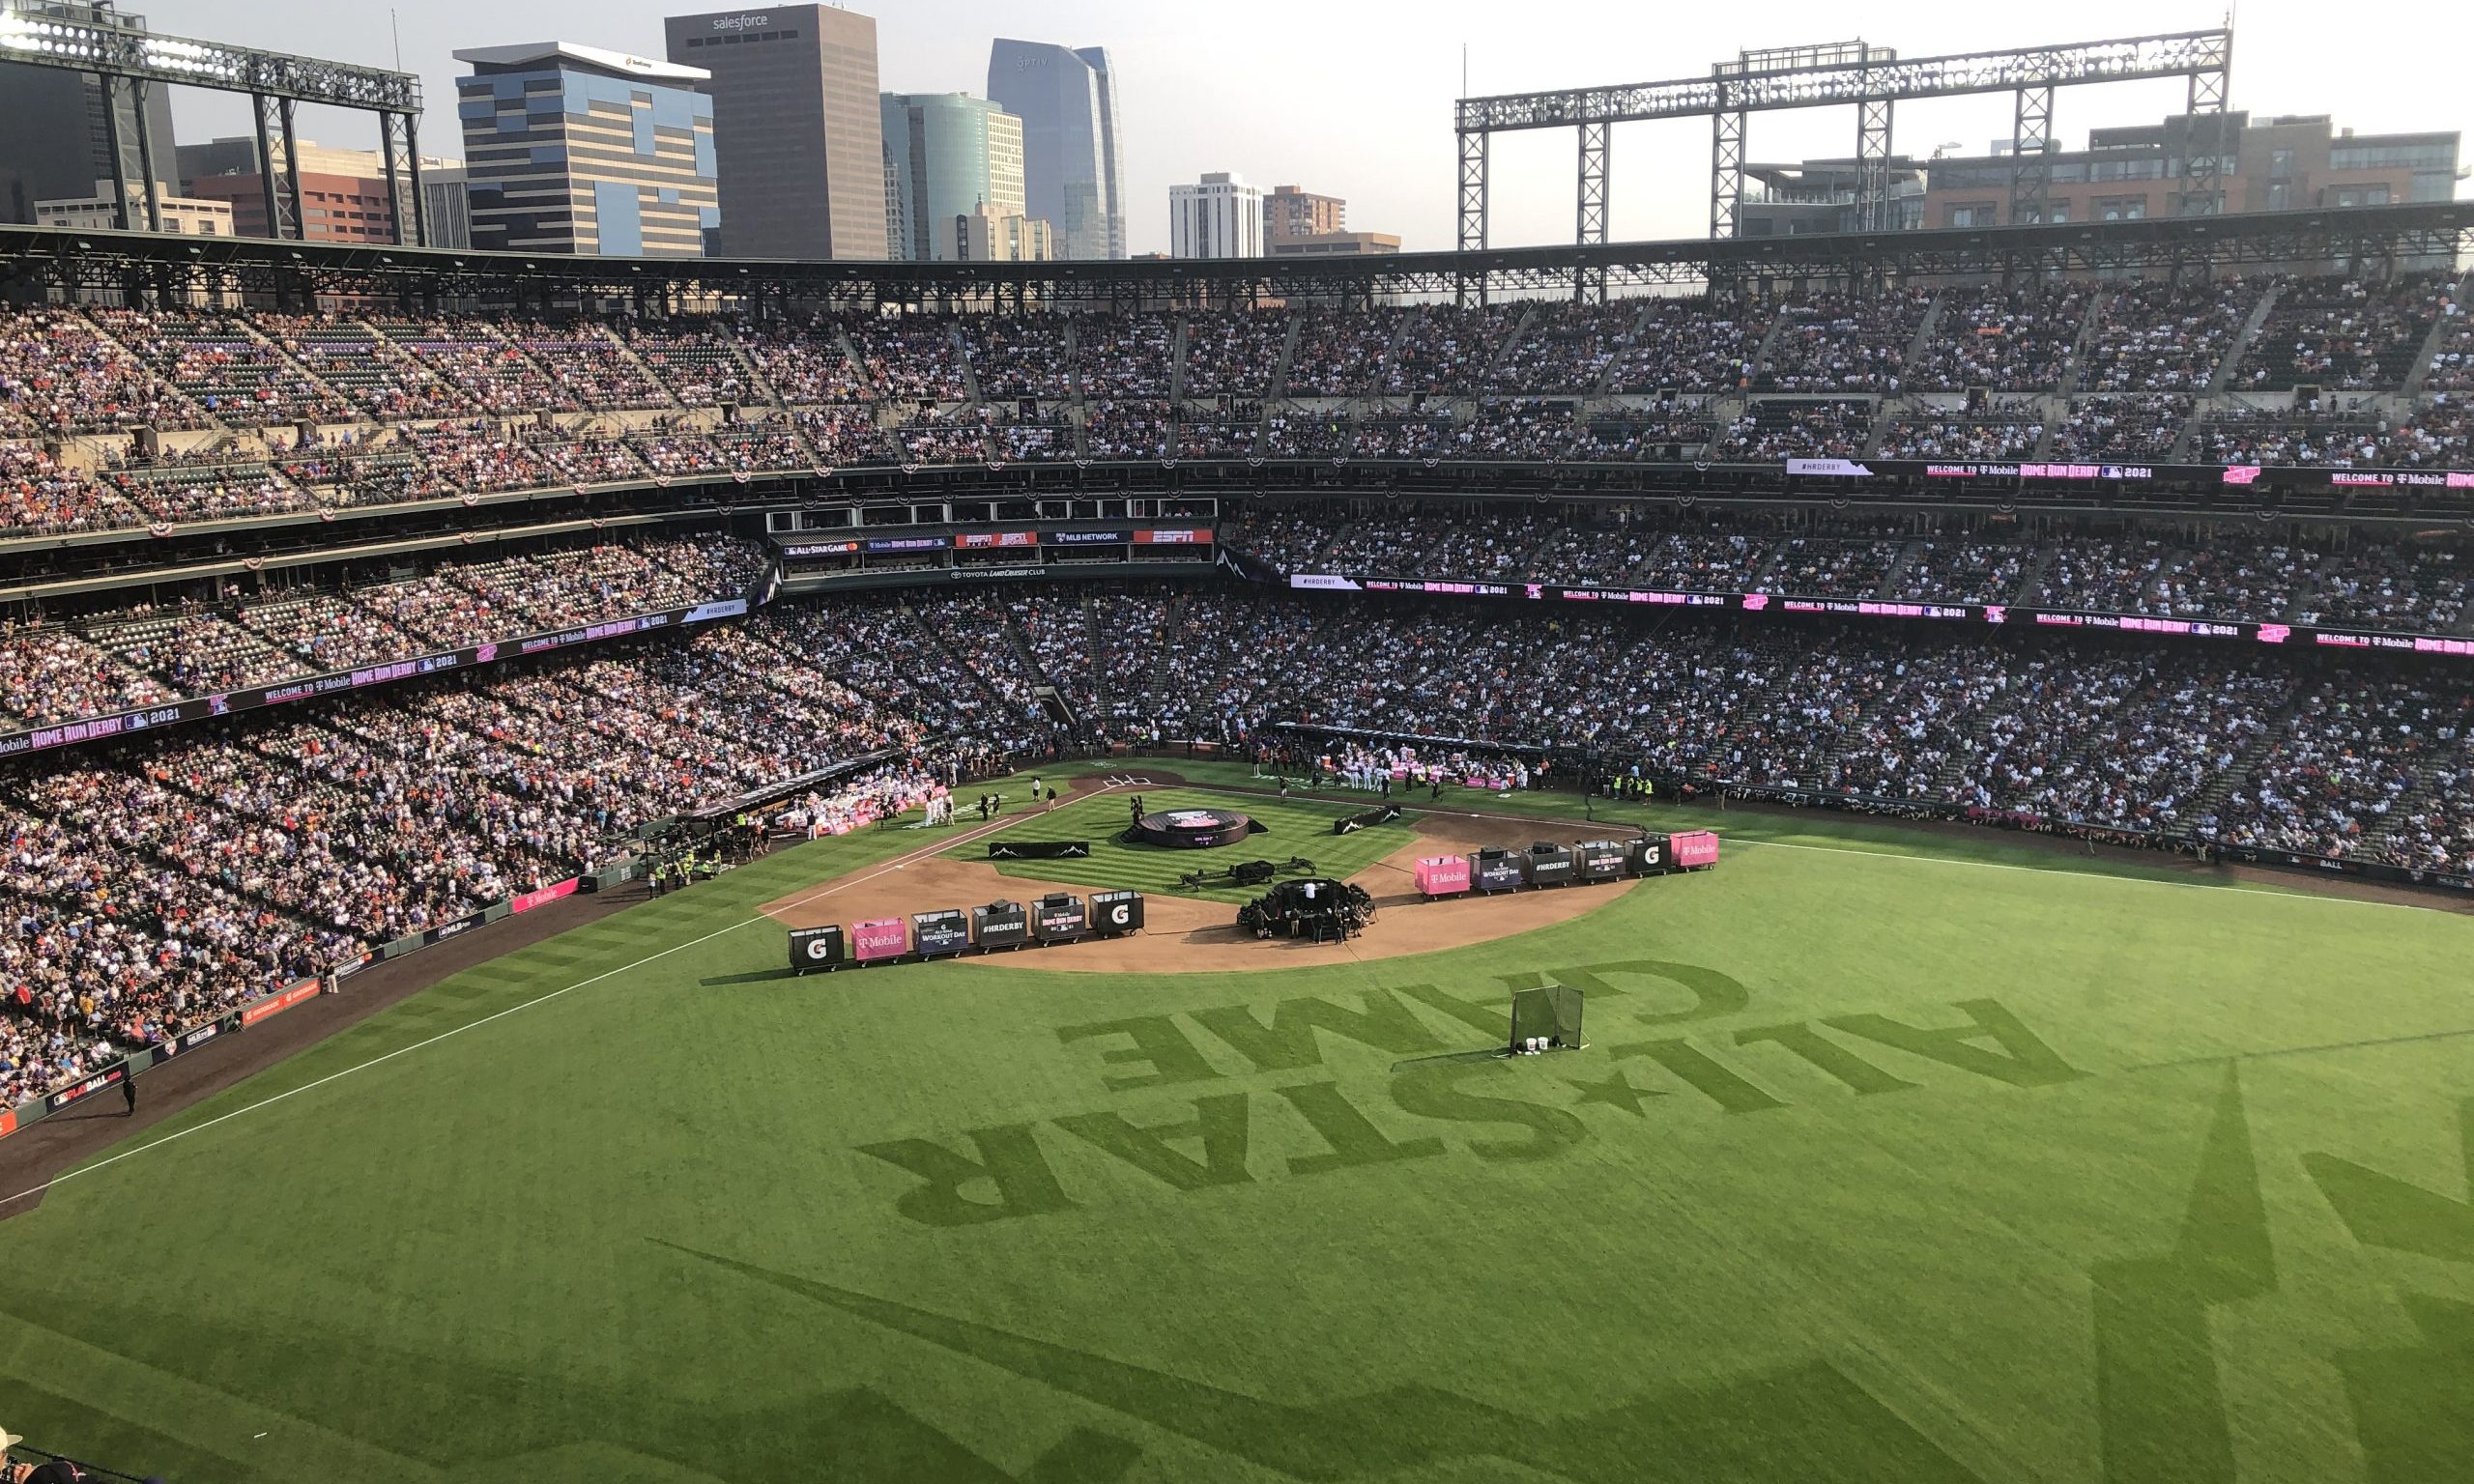 MLB All-Star Game 2021 at Coors Field